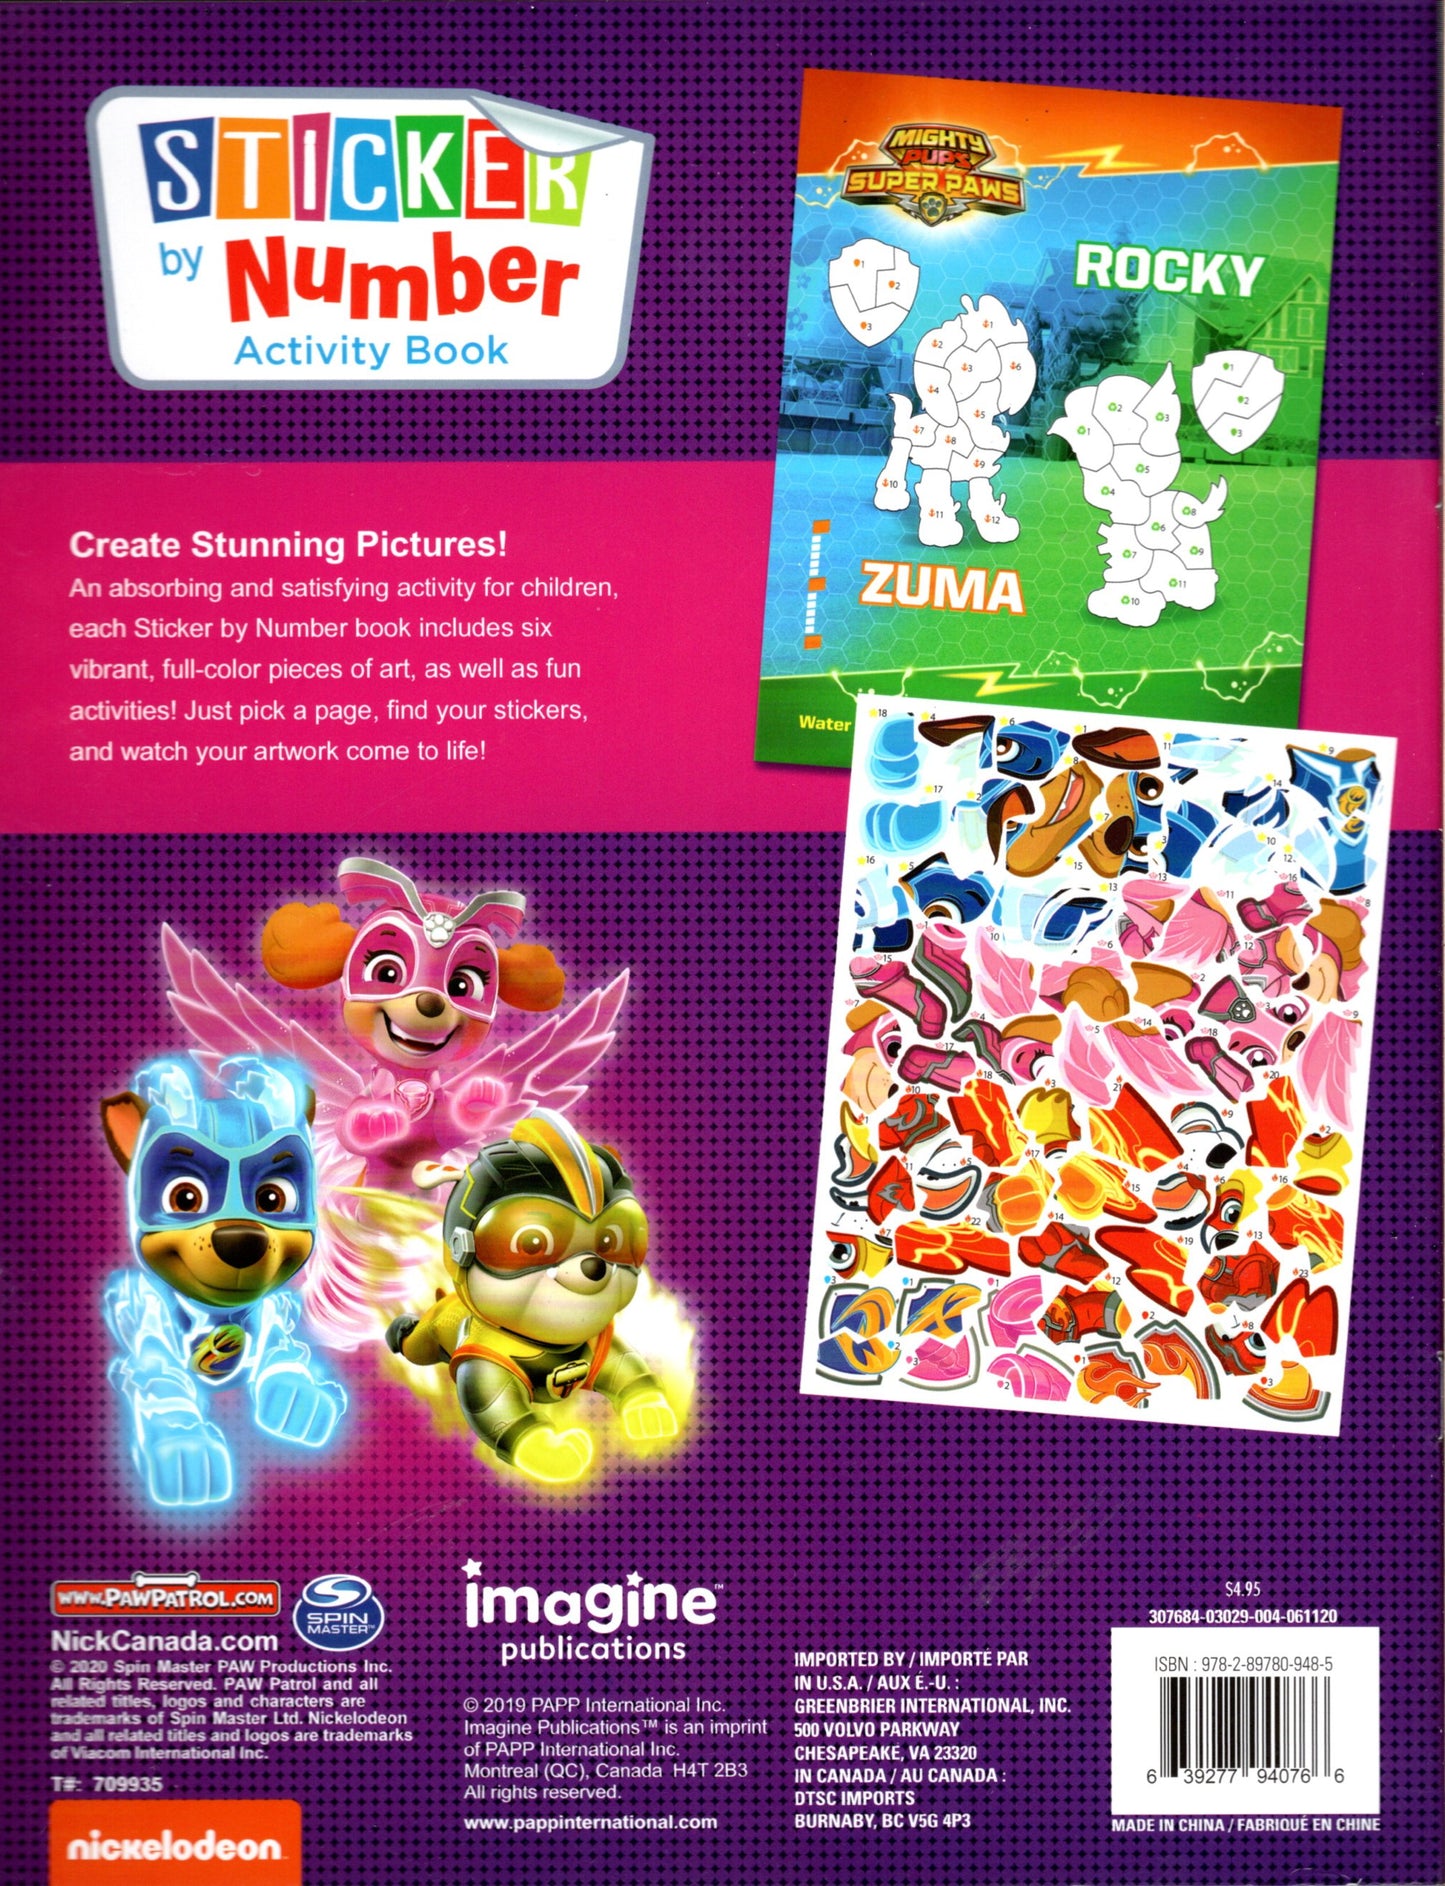 Nickelodeon Paw Patrol - Sticker by Number Activity Book Over 140 Stickers